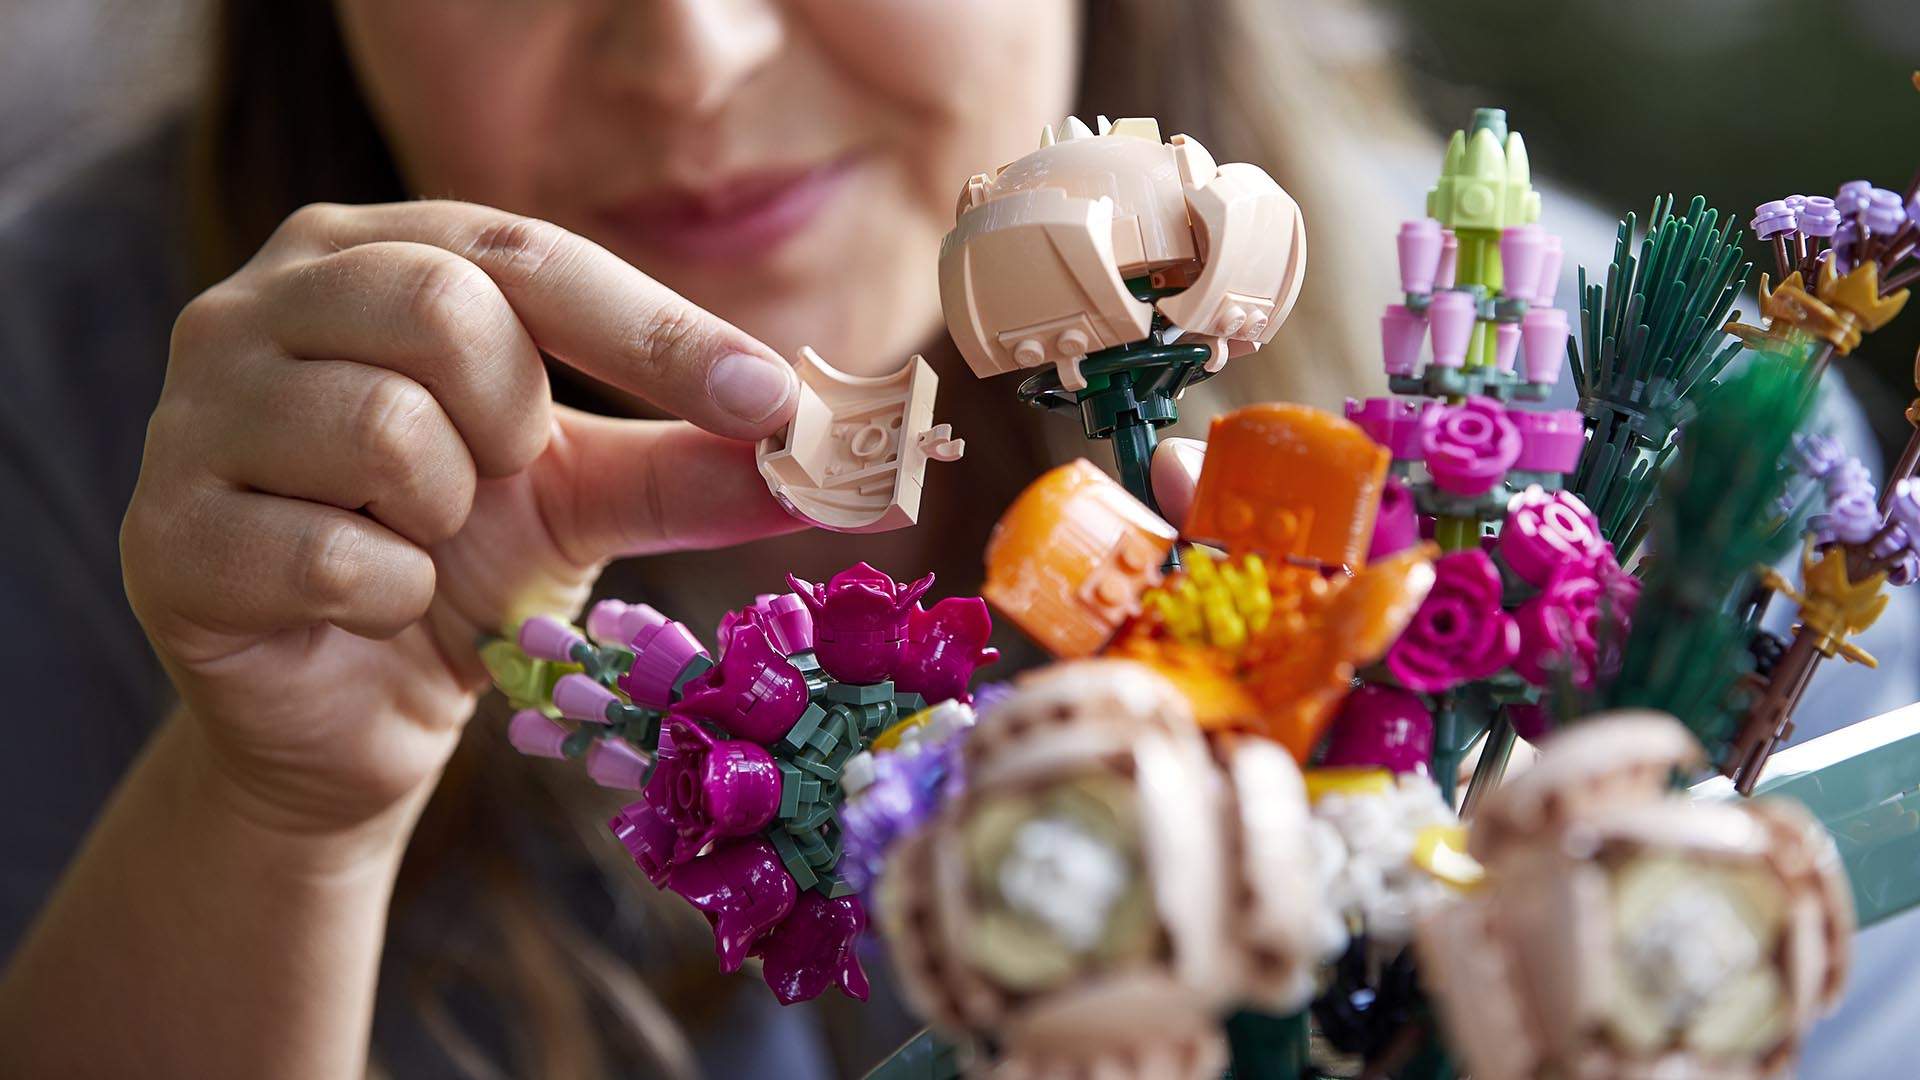 Lego's Cute New Floral Kits Let You Build Your Loved Ones a Bouquet That'll Last Forever